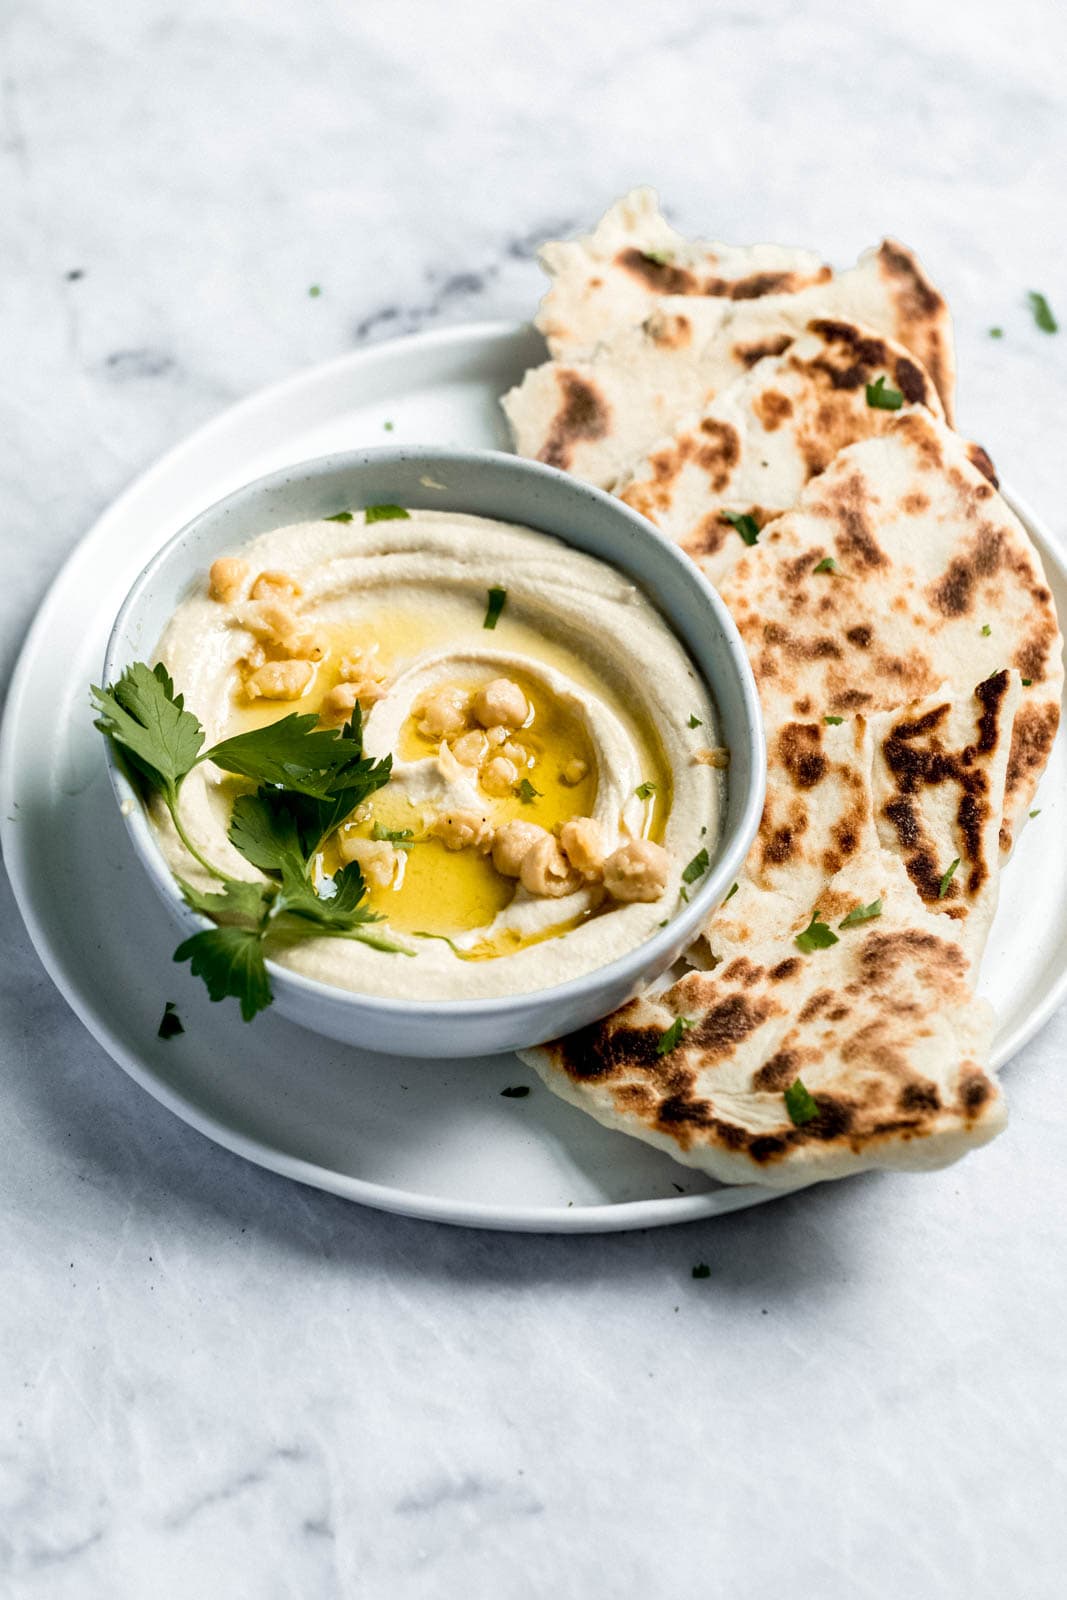 homemade hummus in a bowl with pita bread